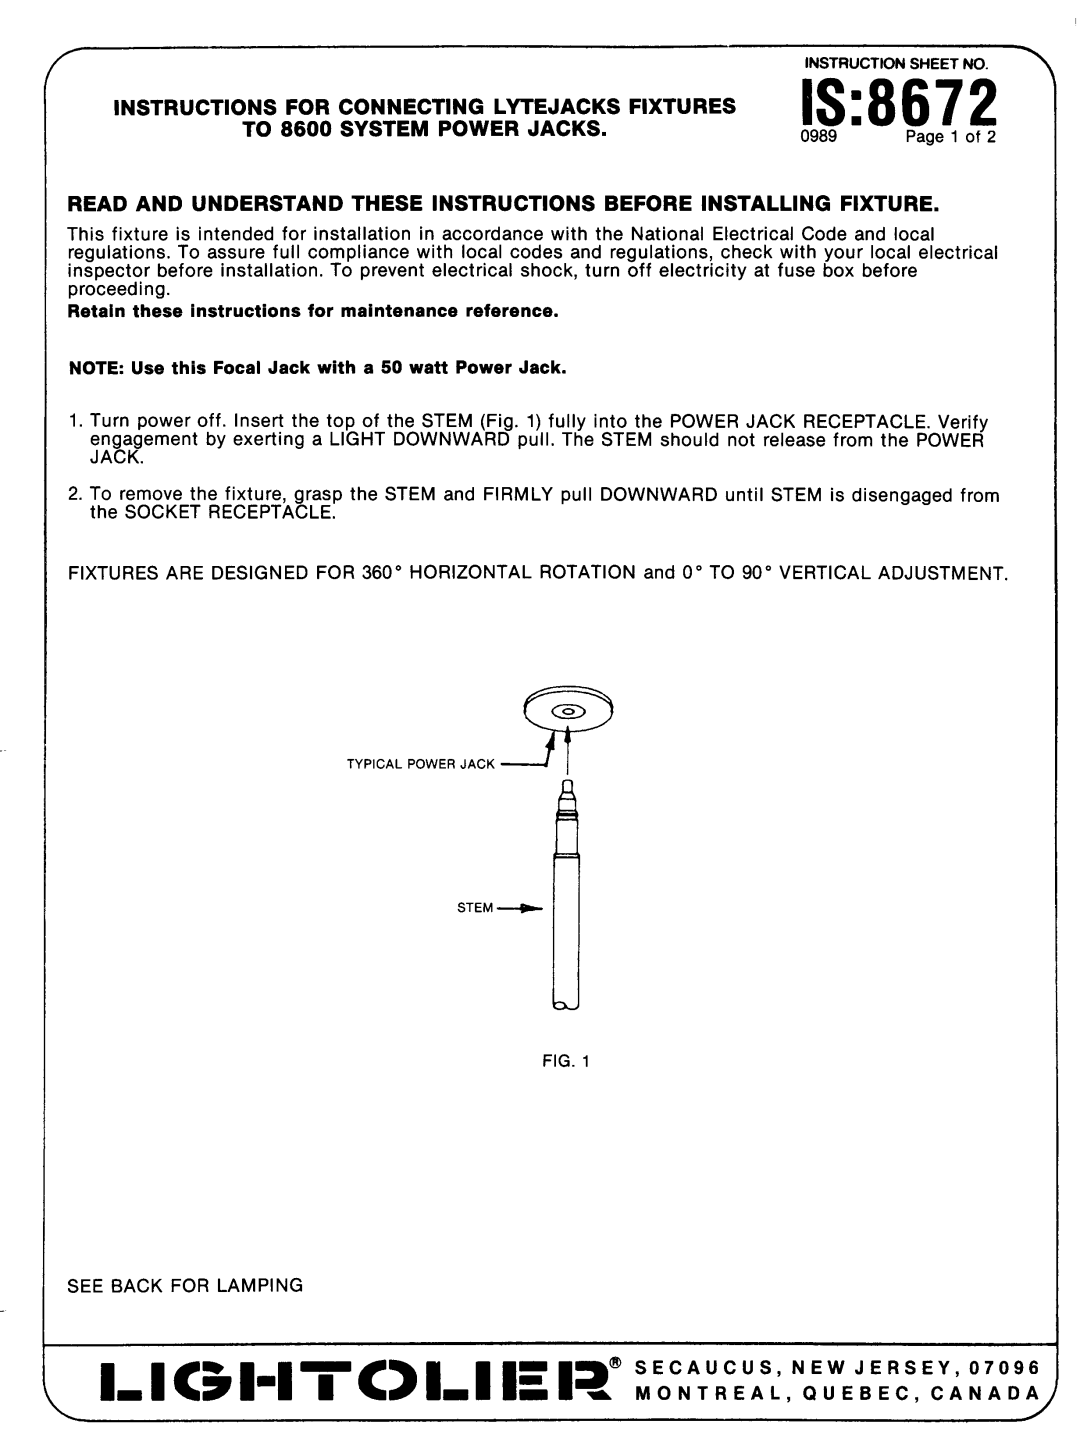 Lightolier 8672 instruction sheet Instructions For Connecting Lytejacks Fixtures, TO 8600 SYSTEM POWER JACKS, Is 